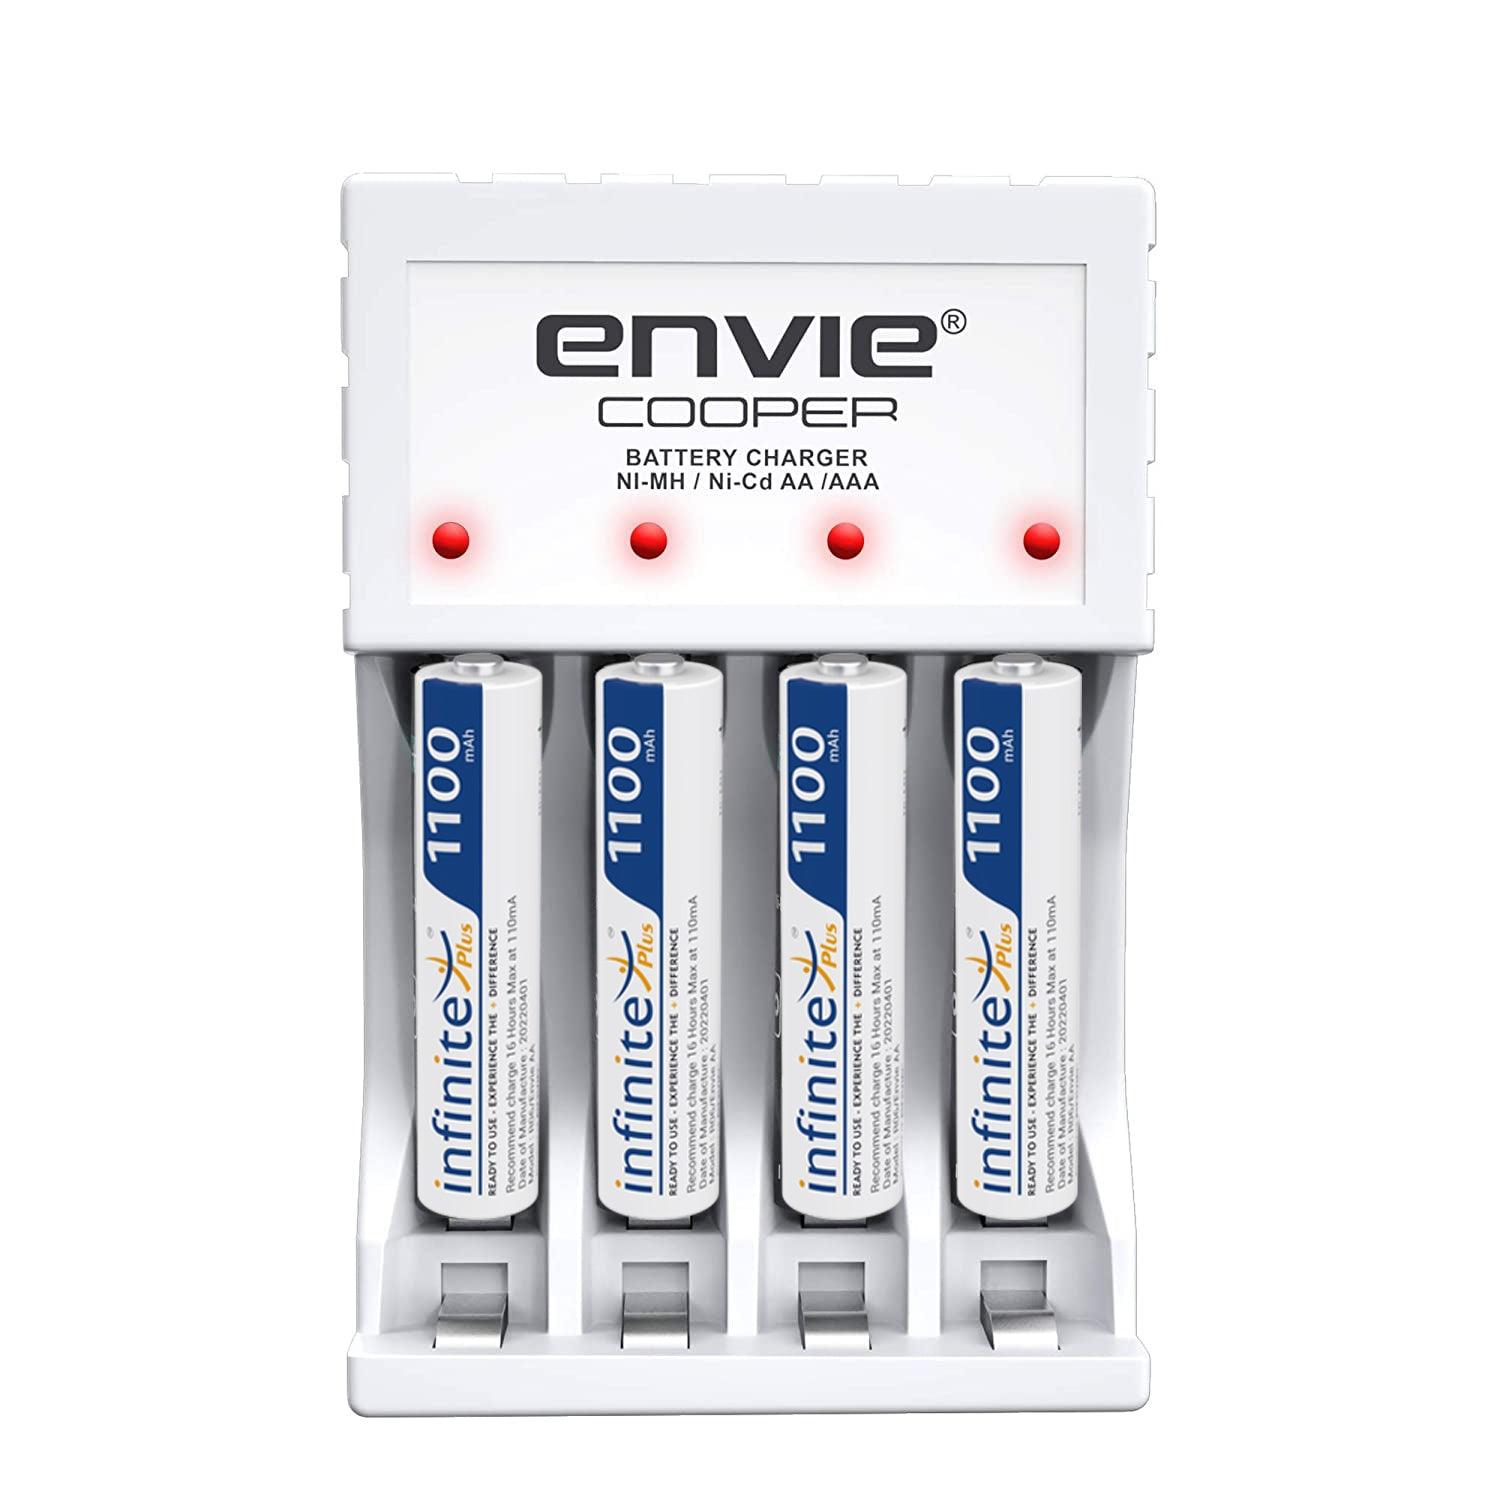 Buy ENVIE (ECR 20 MC+4xAAA1100) Standard Rechargeable Battery Charger for  Online Best Prices